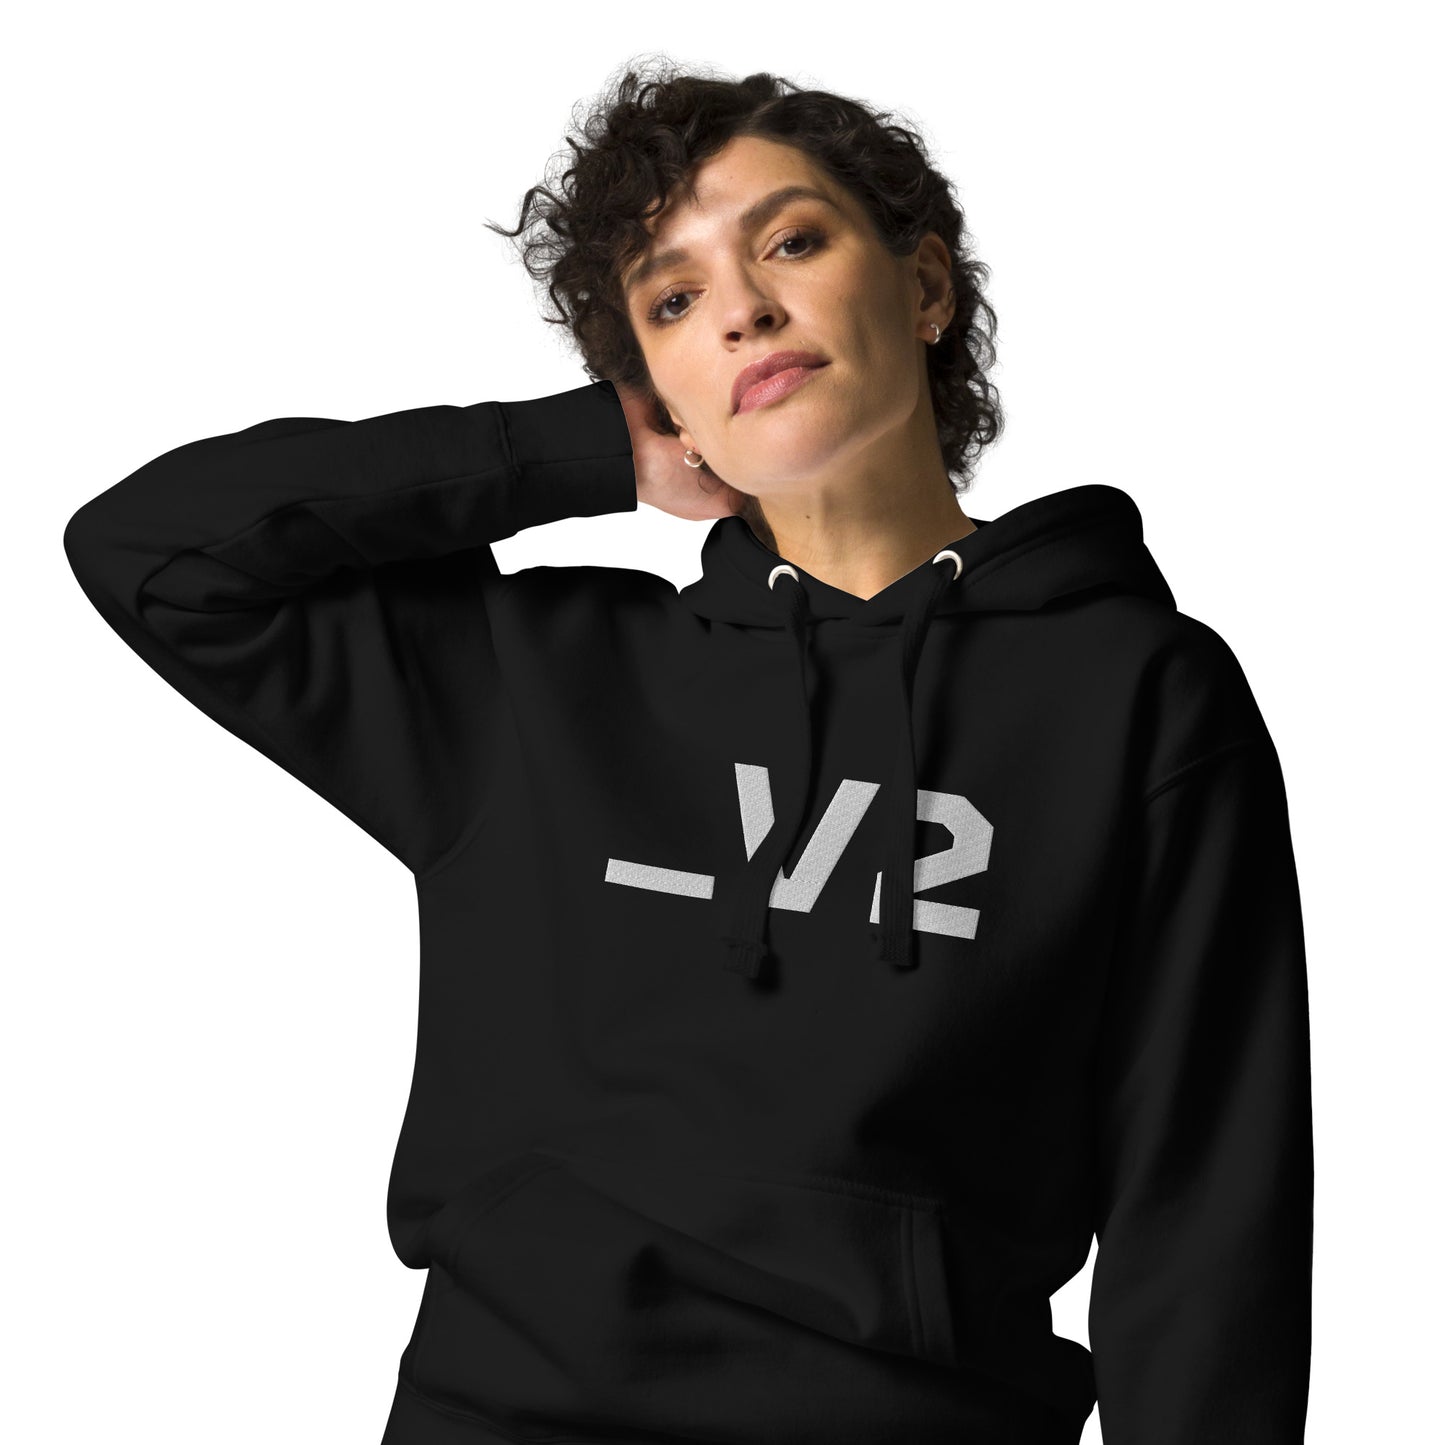 _V2 Large Embroidery Unisex Hoodie